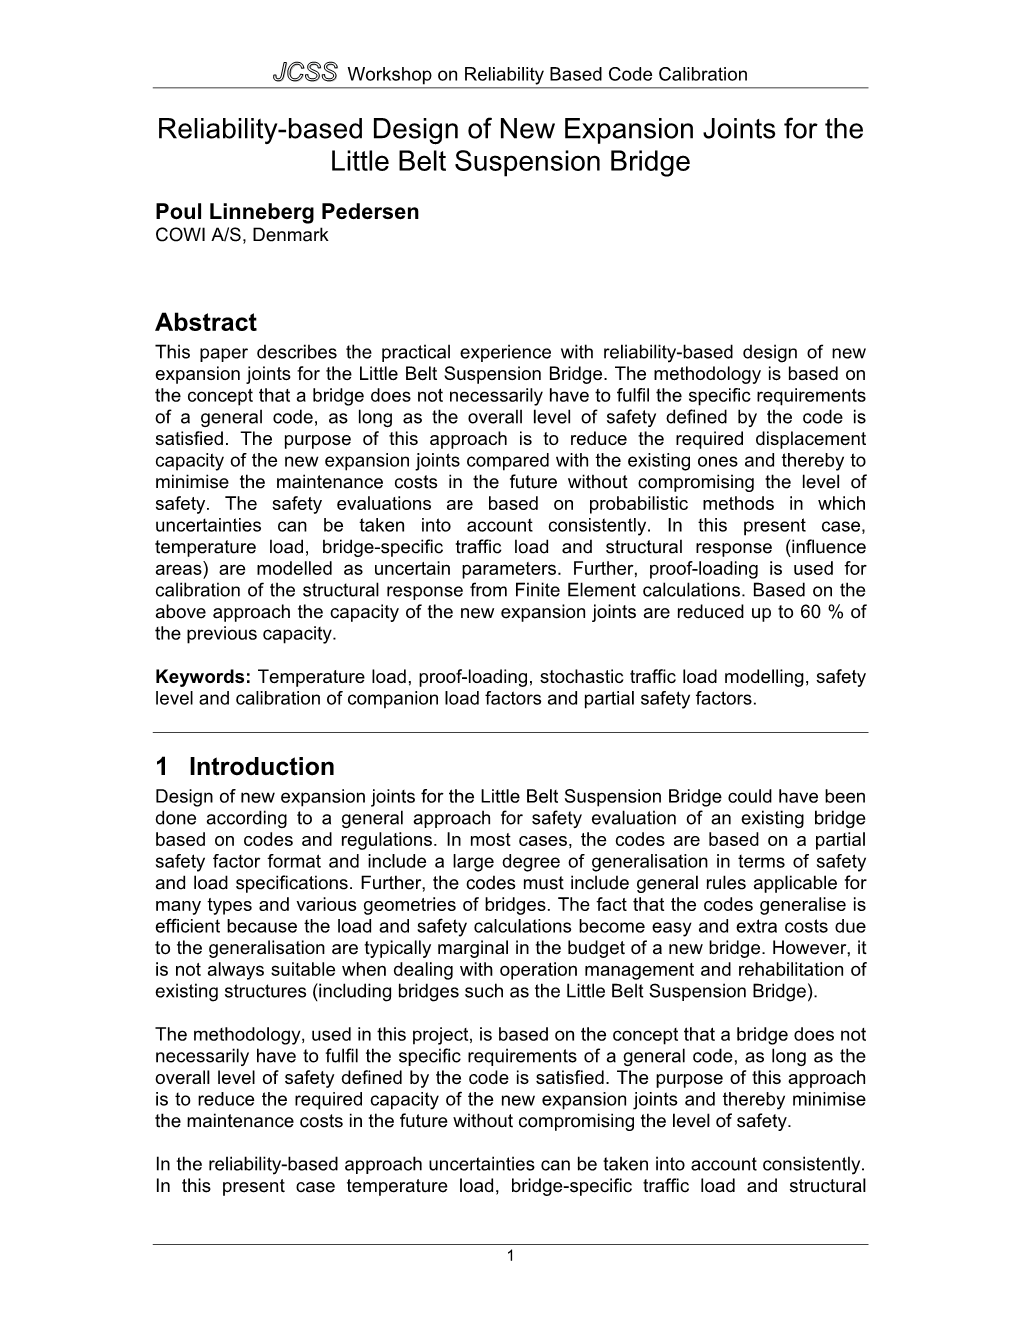 Reliability-Based Design of New Expansion Joints for the Little Belt Suspension Bridge